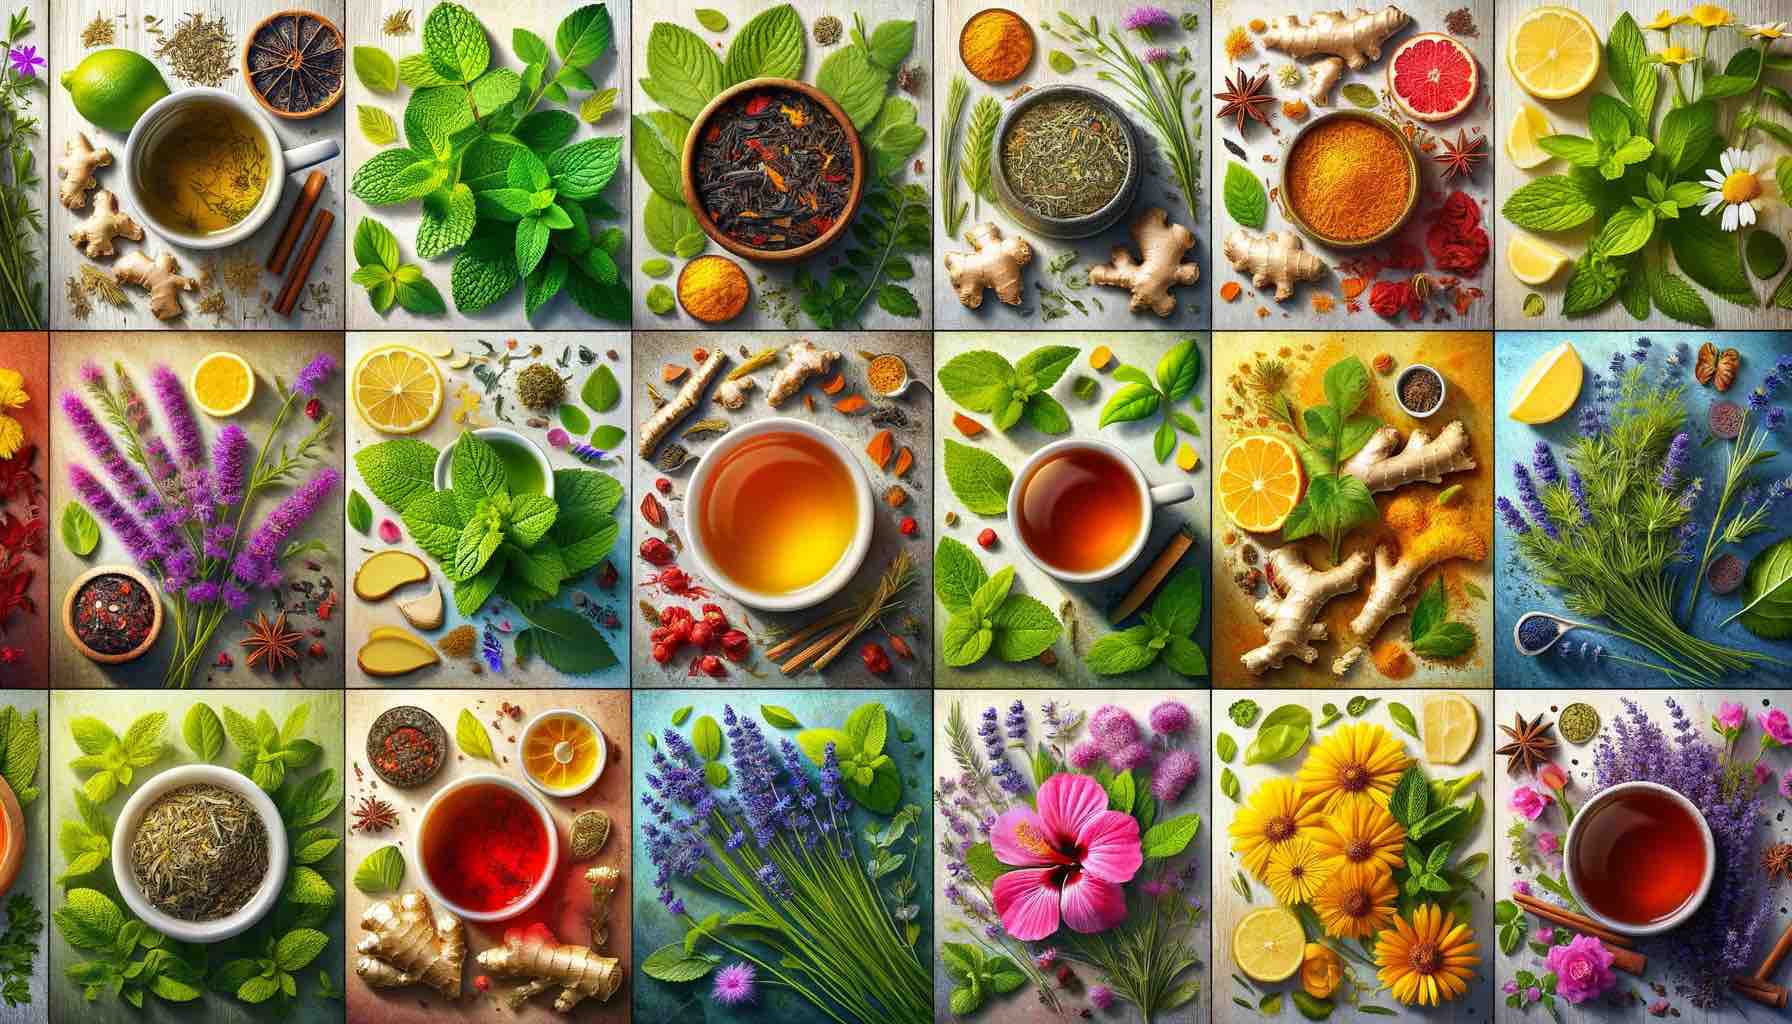 8 Herbal Teas for a Healthier Body and Mind